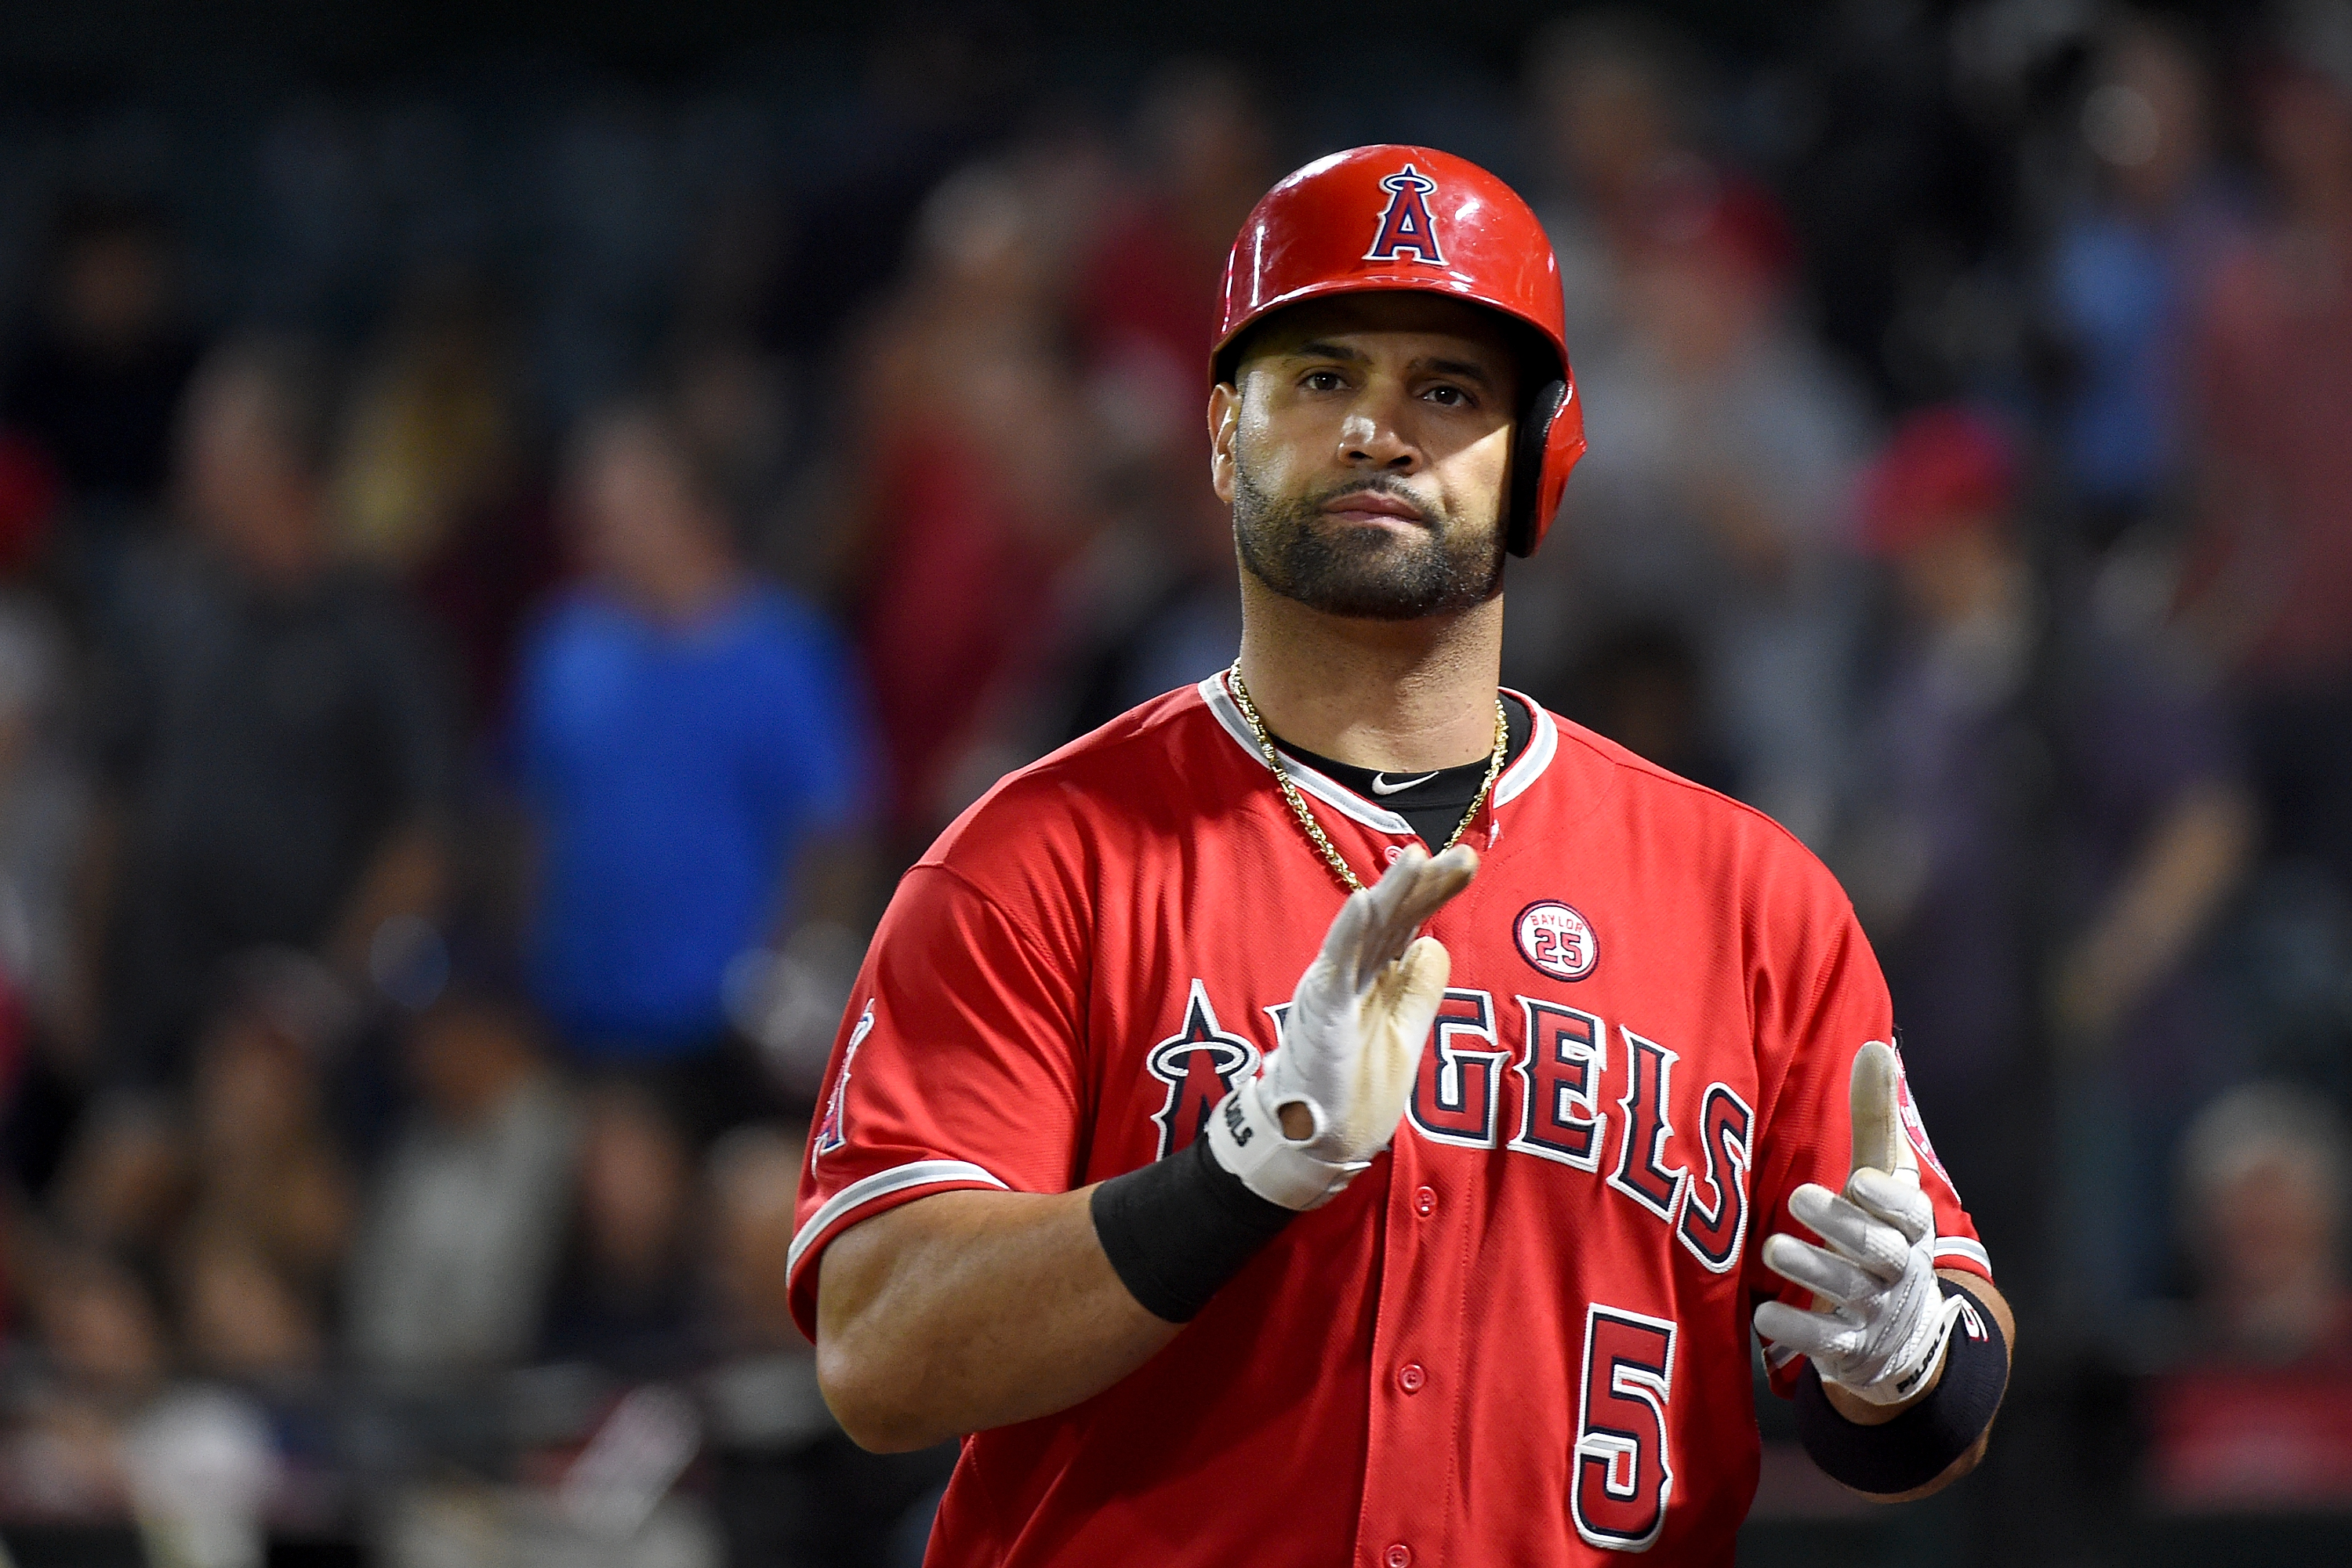 As Shohei Ohtani attempts to make history, Albert Pujols can help